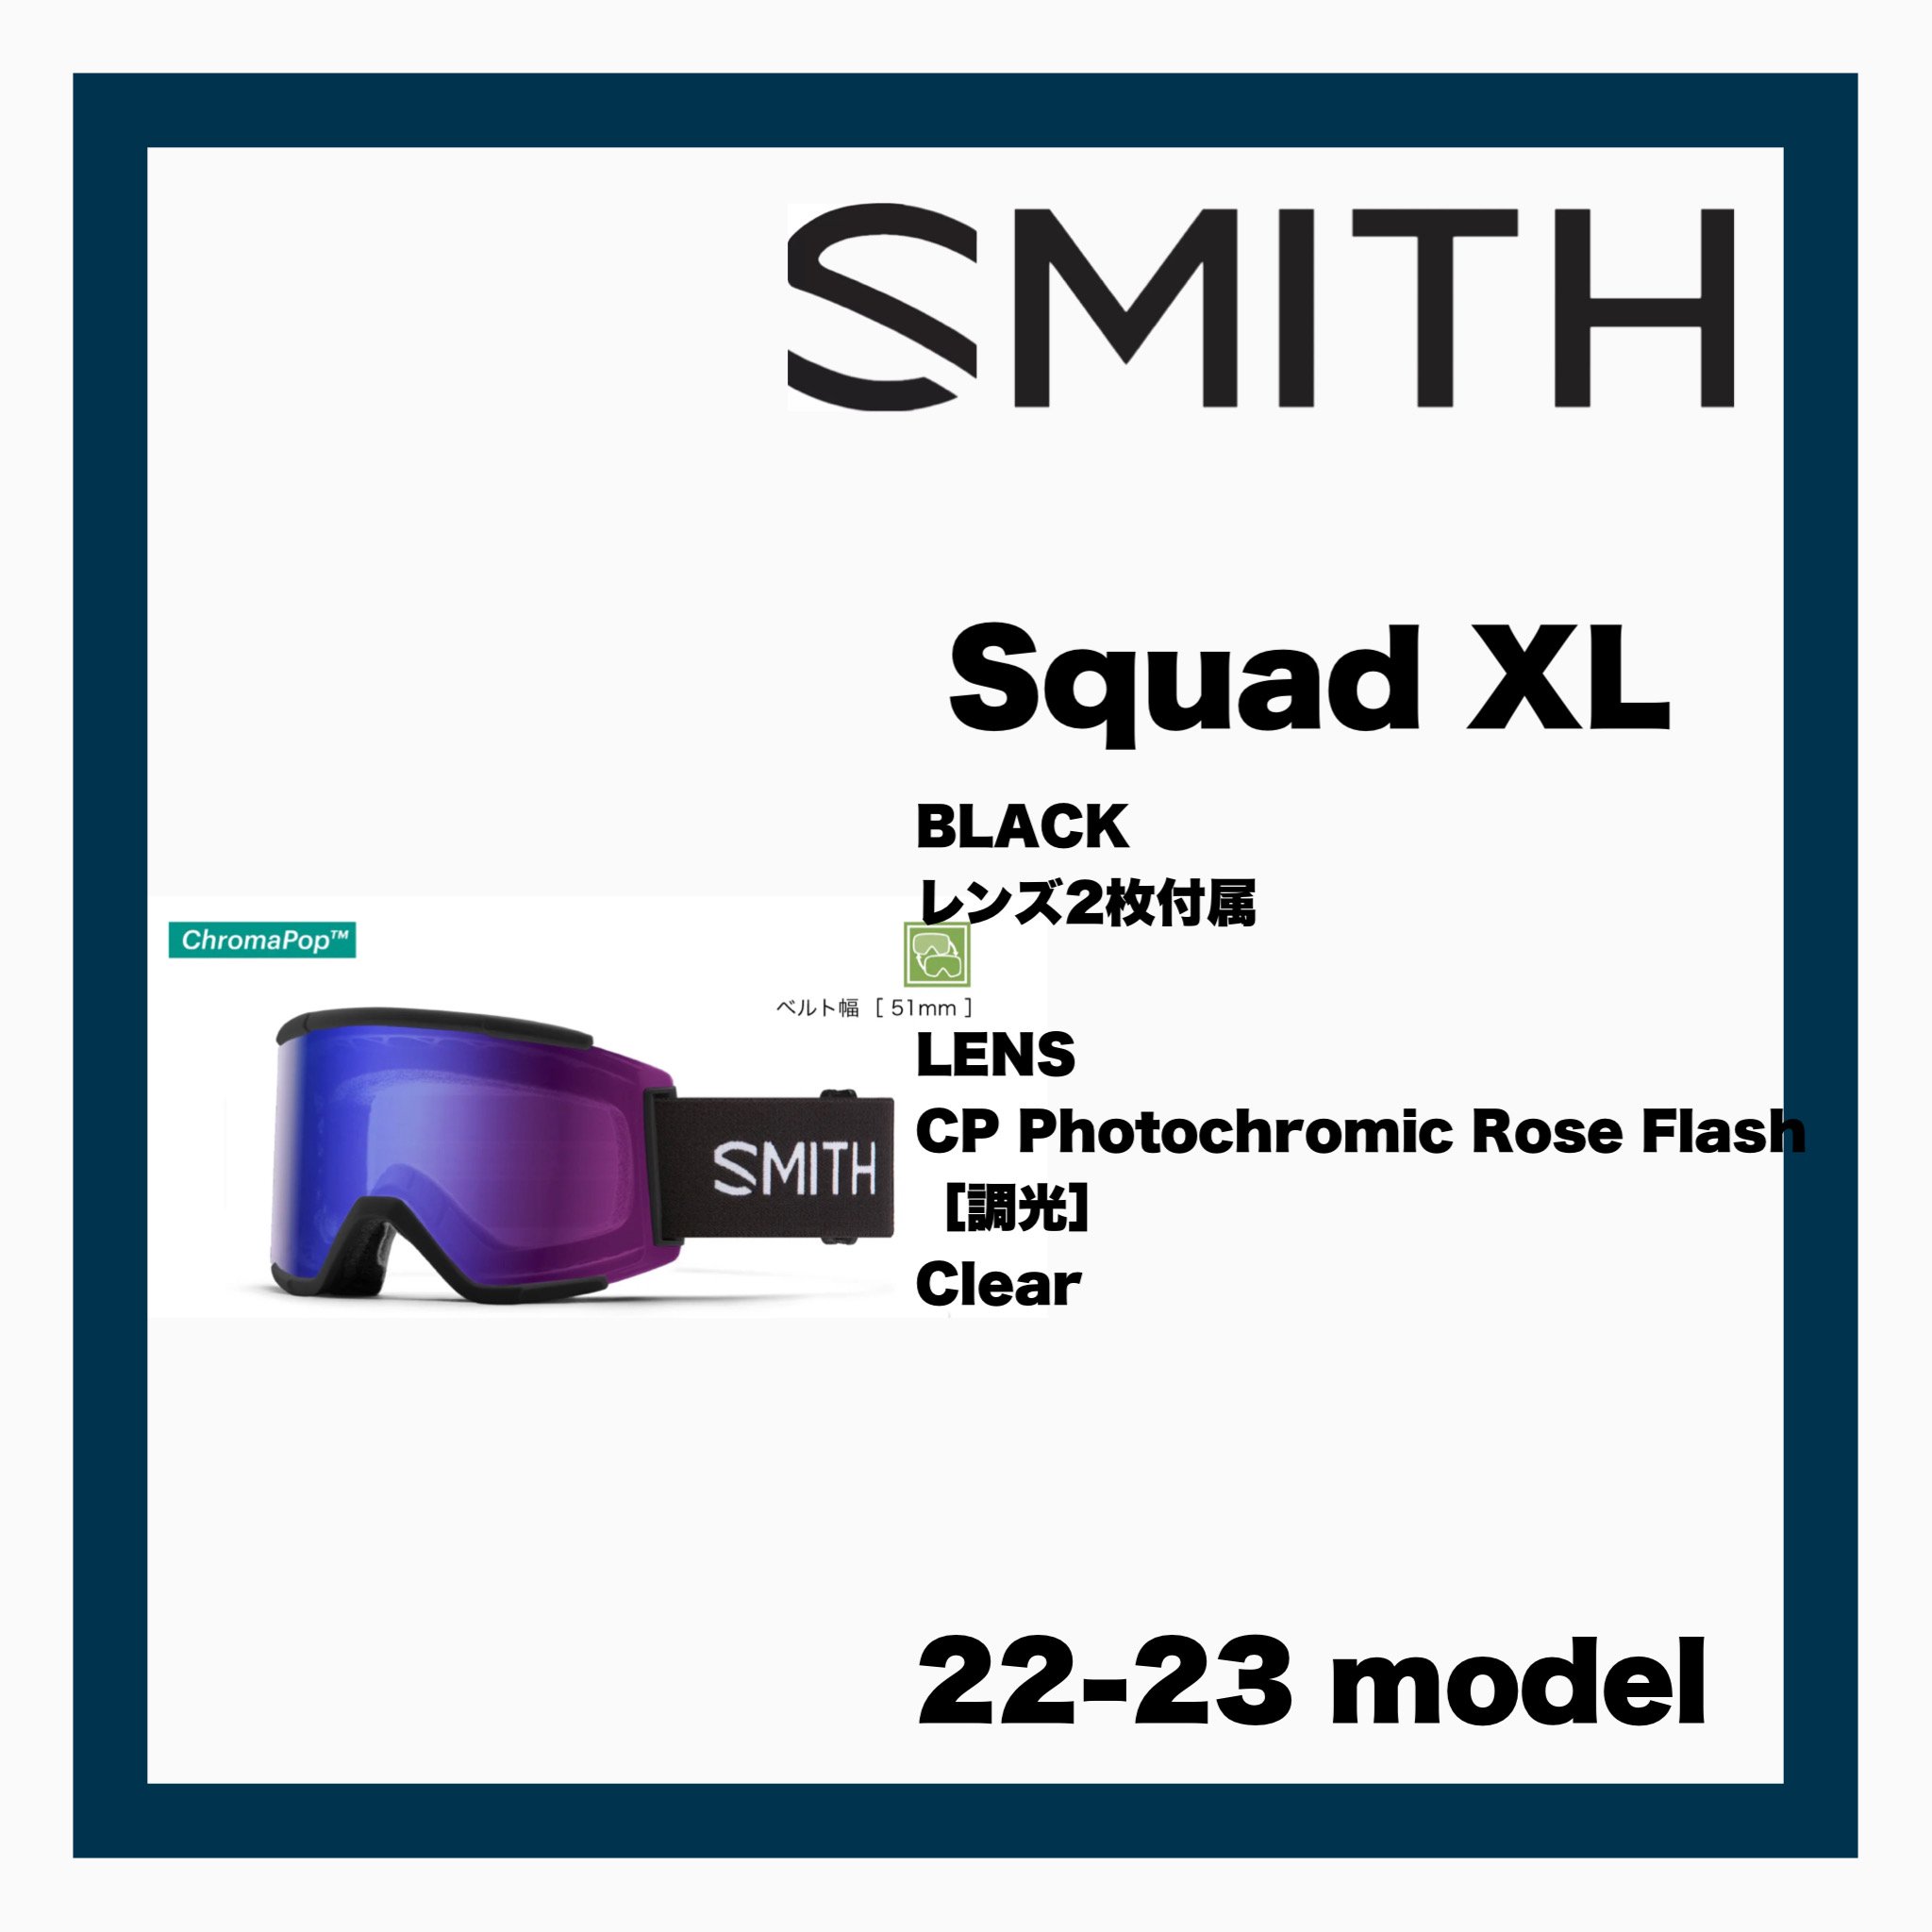 <img class='new_mark_img1' src='https://img.shop-pro.jp/img/new/icons24.gif' style='border:none;display:inline;margin:0px;padding:0px;width:auto;' />SMITHSquad XL Black